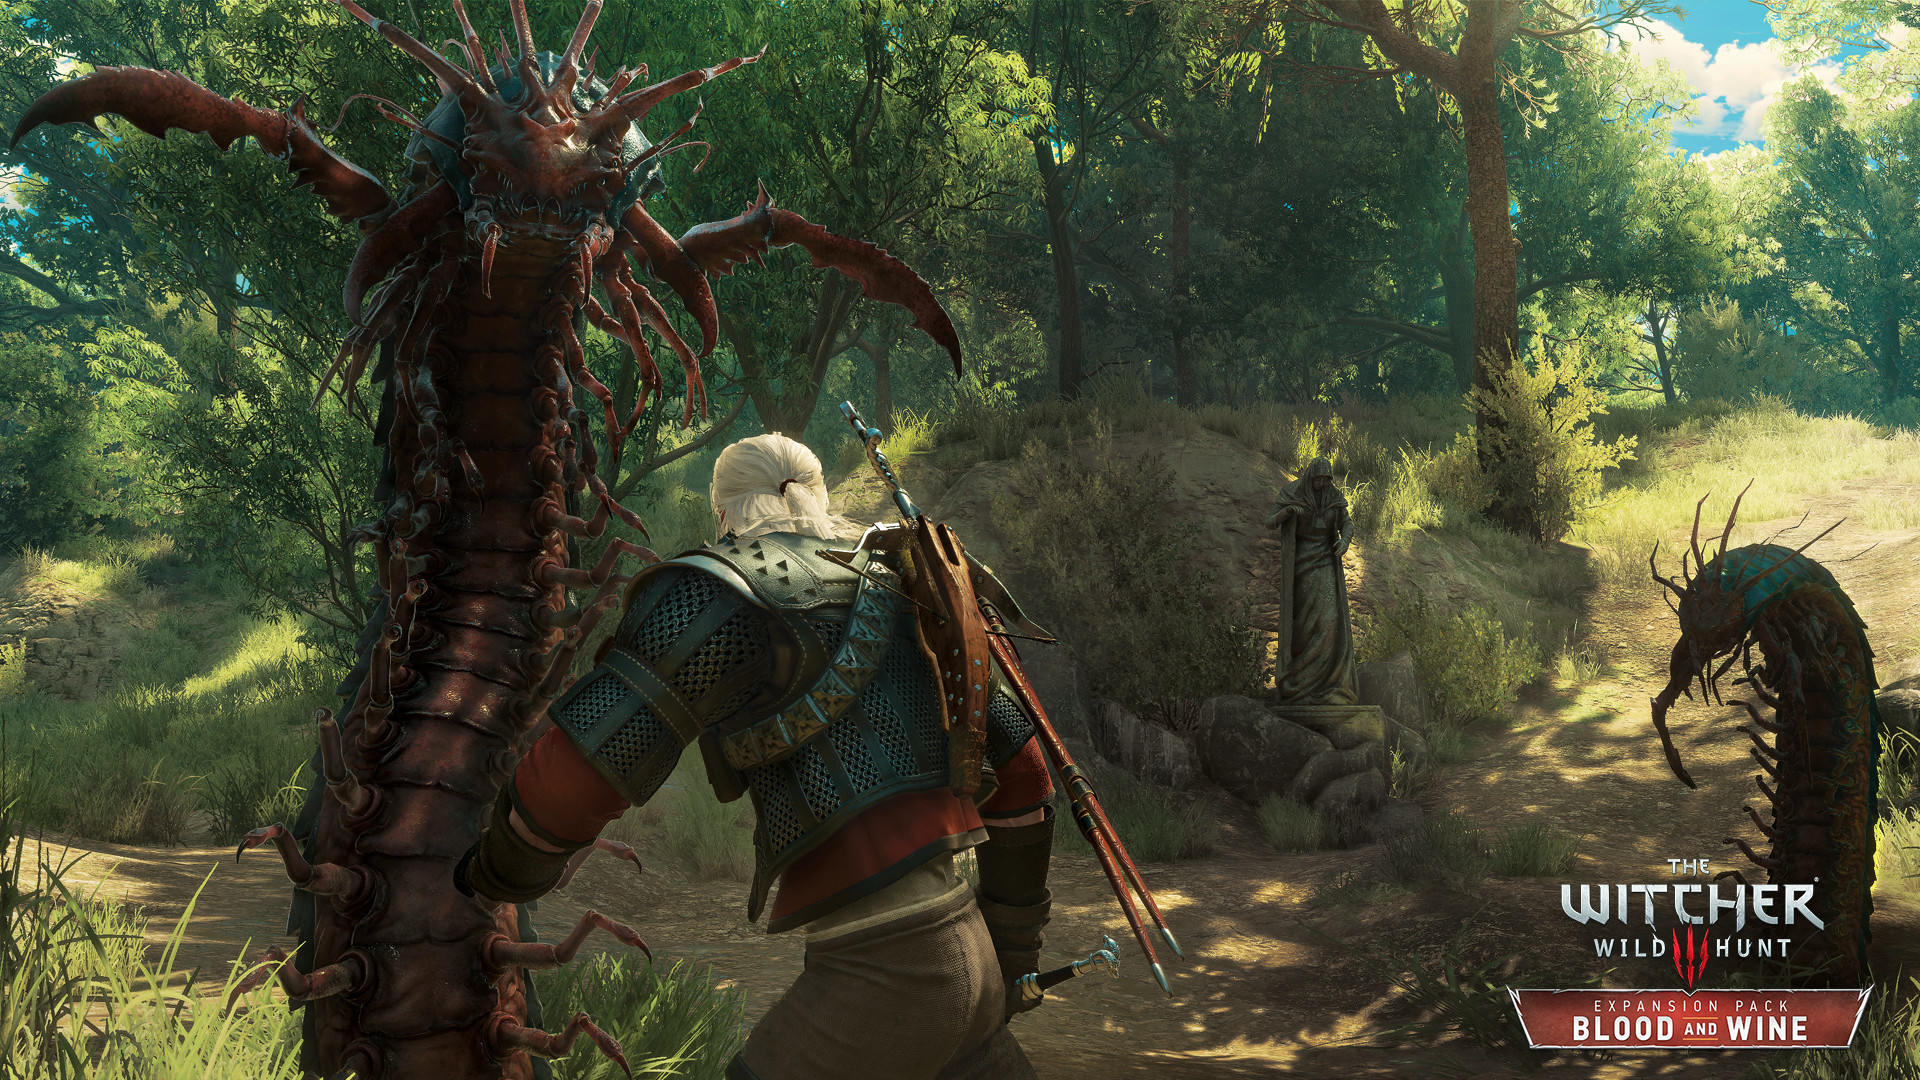 The Witcher 3: Wild Hunt - Blood and Wine Soundtrack Featured Screenshot #1